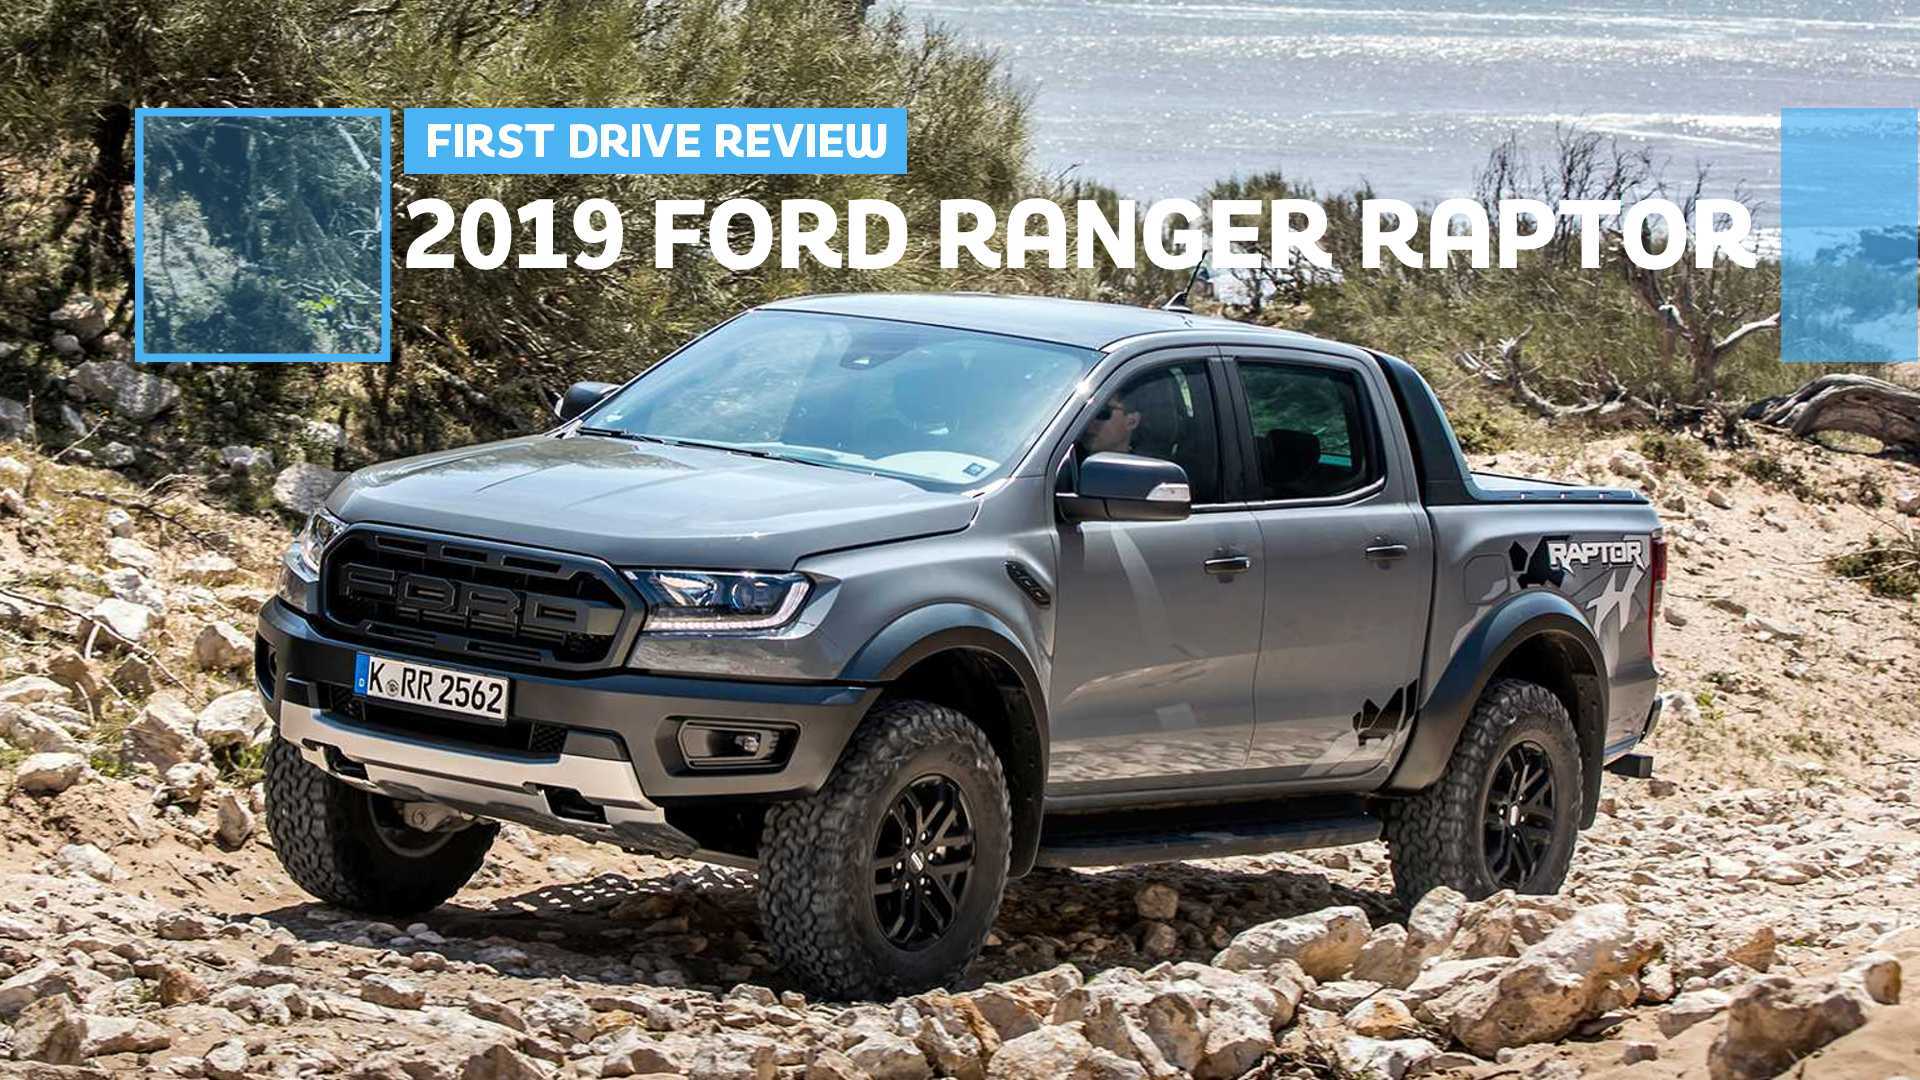 2019 Ford Ranger Raptor First Drive: Off-Road Ready